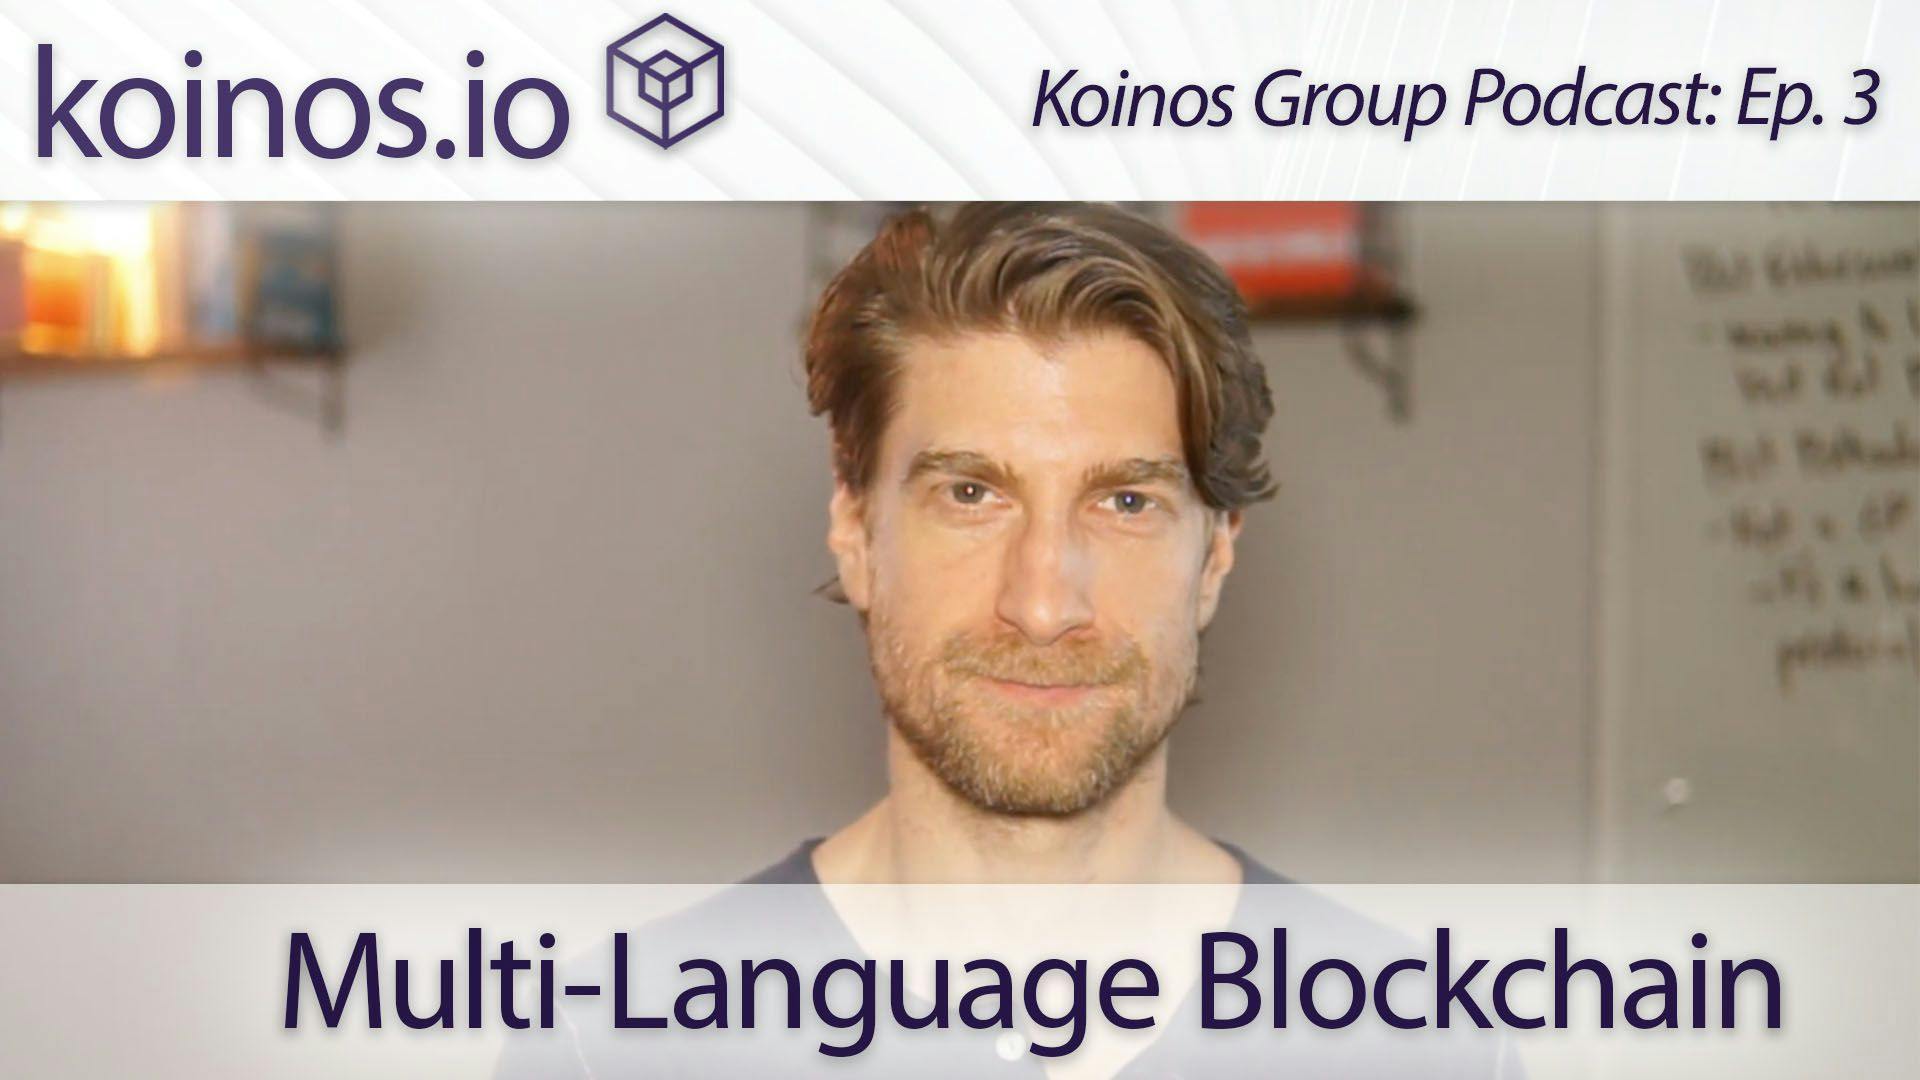 featured image - We're Building a Multi-Language Blockchain That Supports Both JSON RPC and Binary Serialization